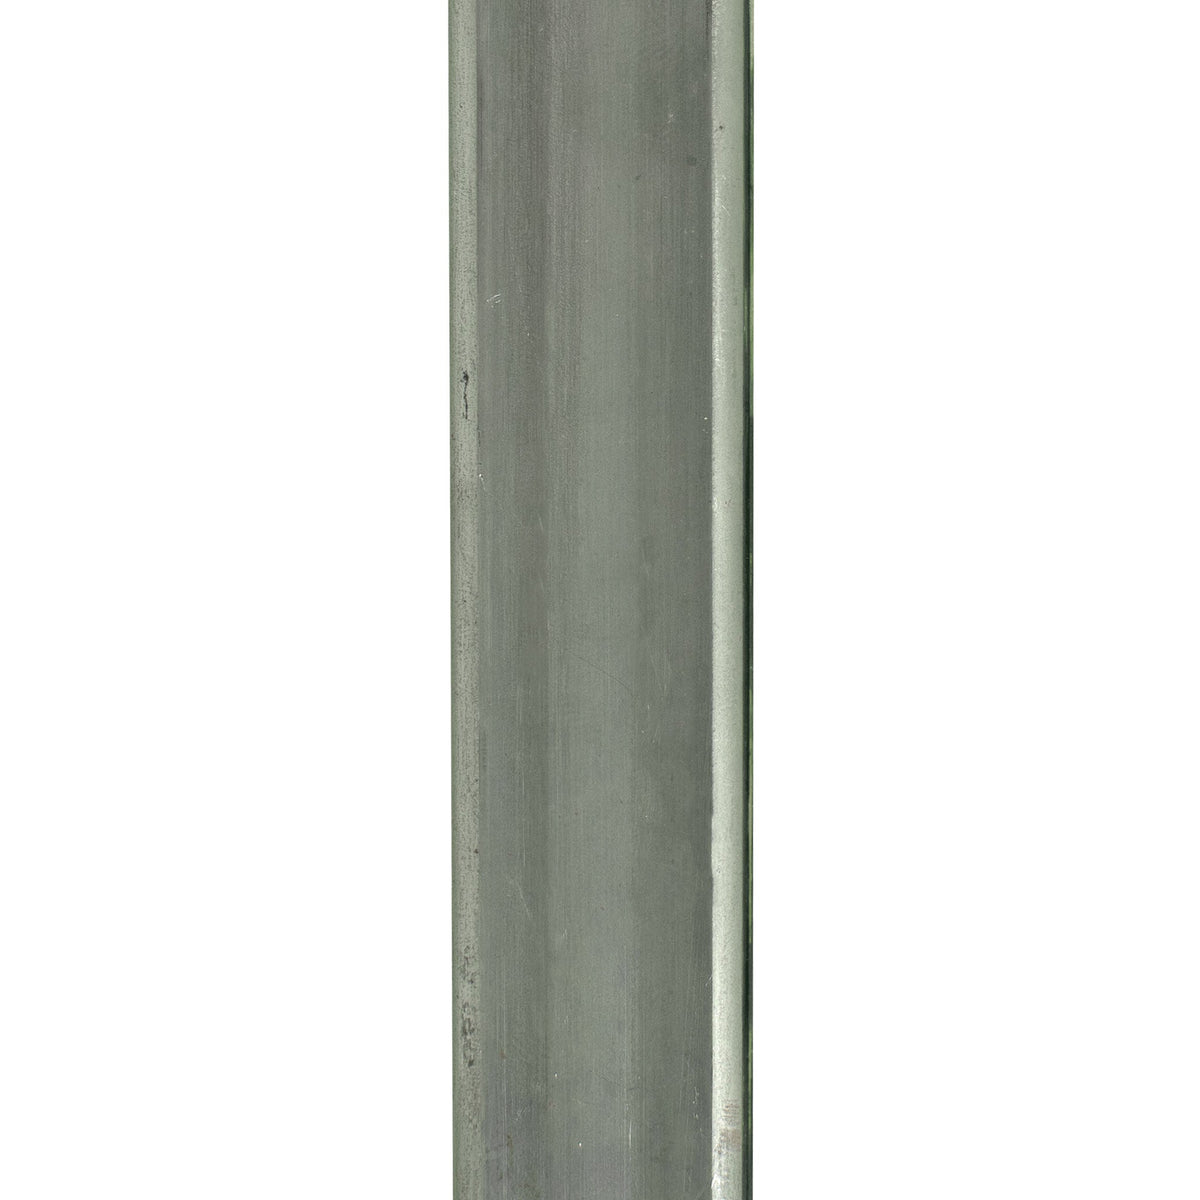 Metal Square Tubes available for sale in varying lengths and sizes